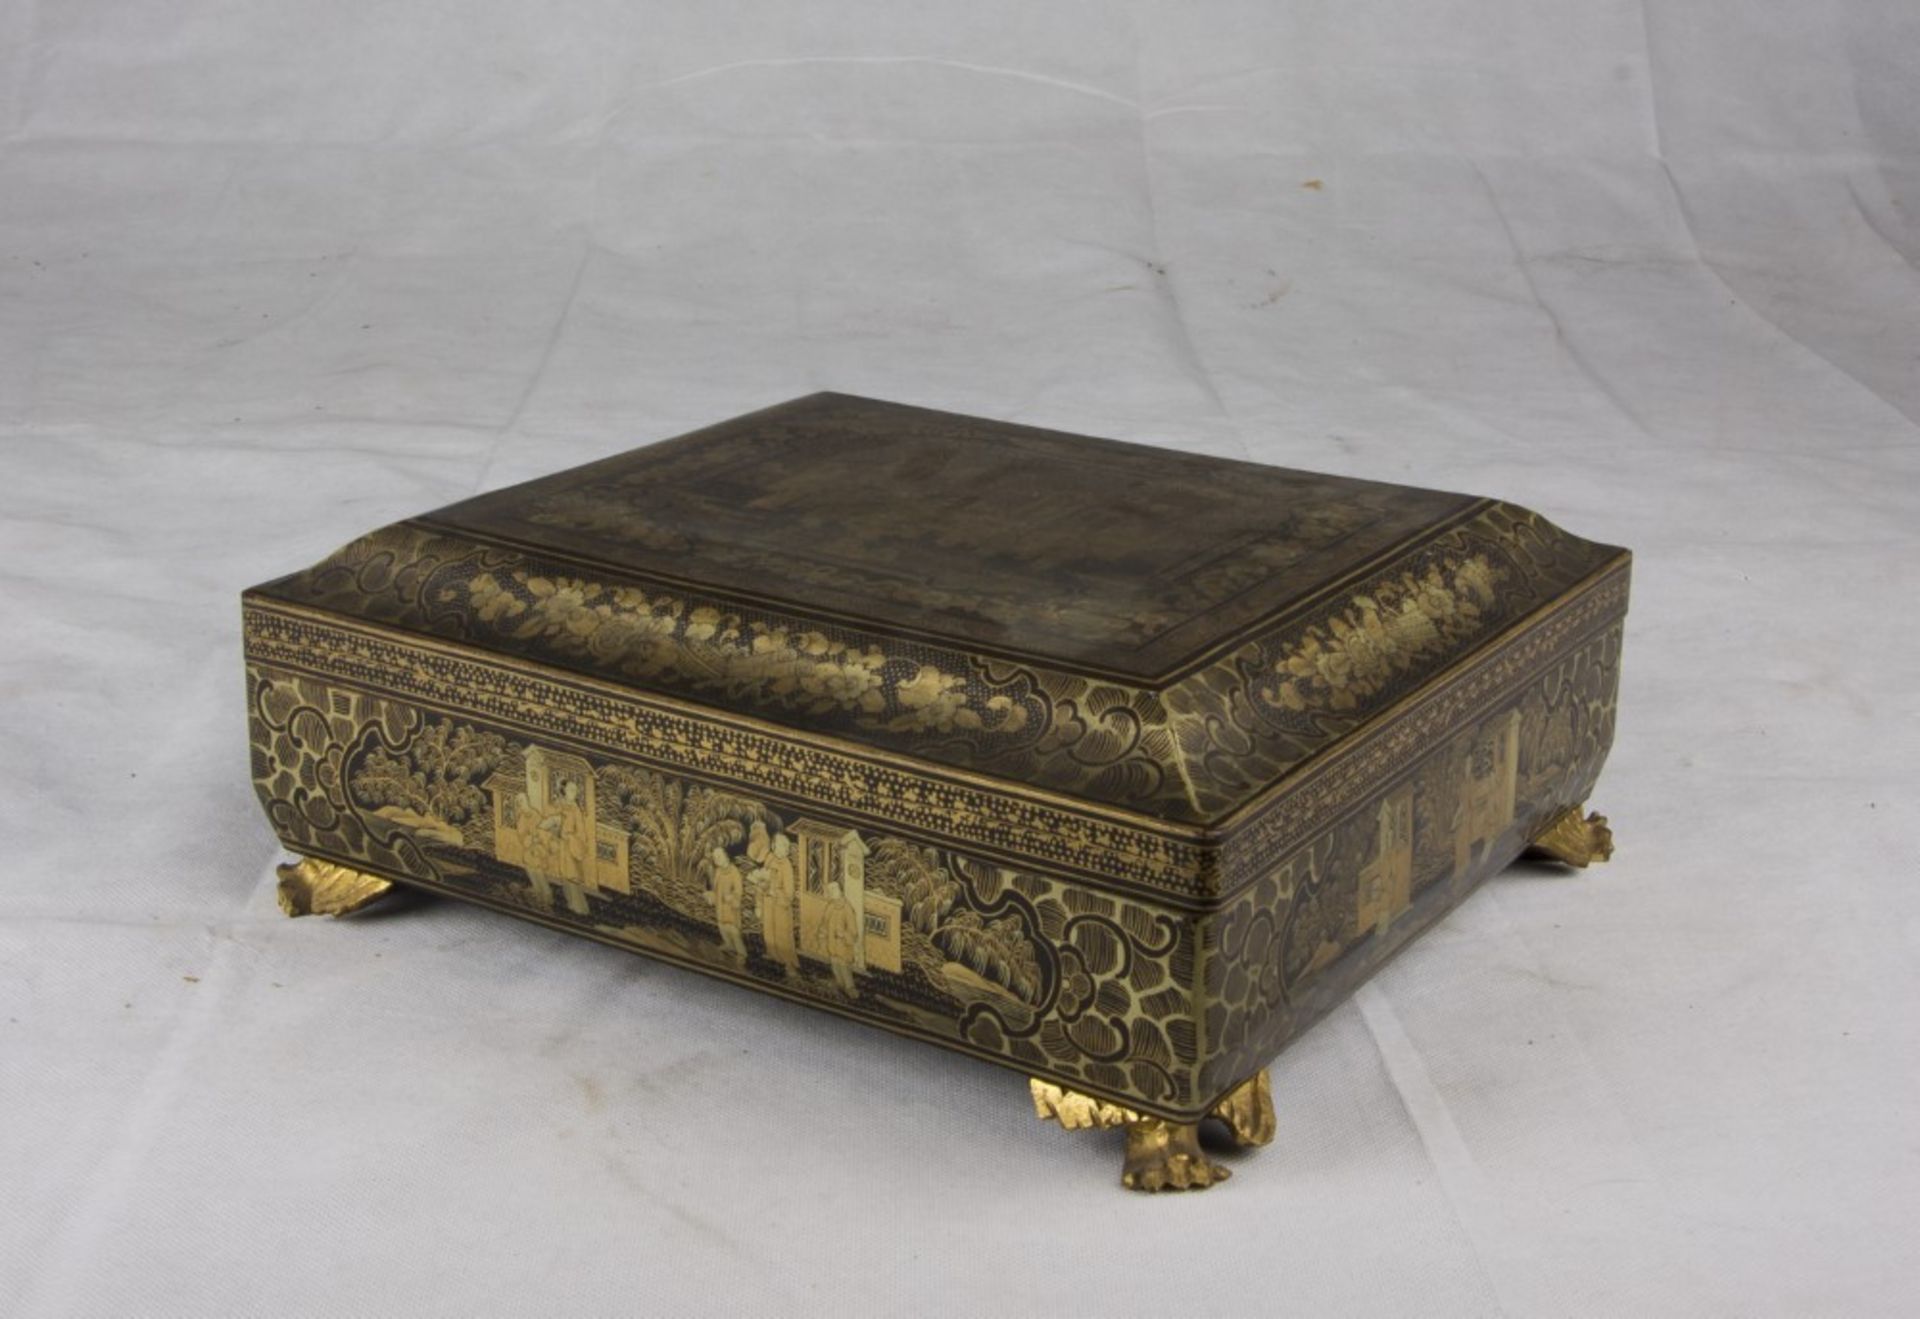 A Chinese gold and black laquer wood box. Second half 19th century. Misure totali cm. 12 x 31 x